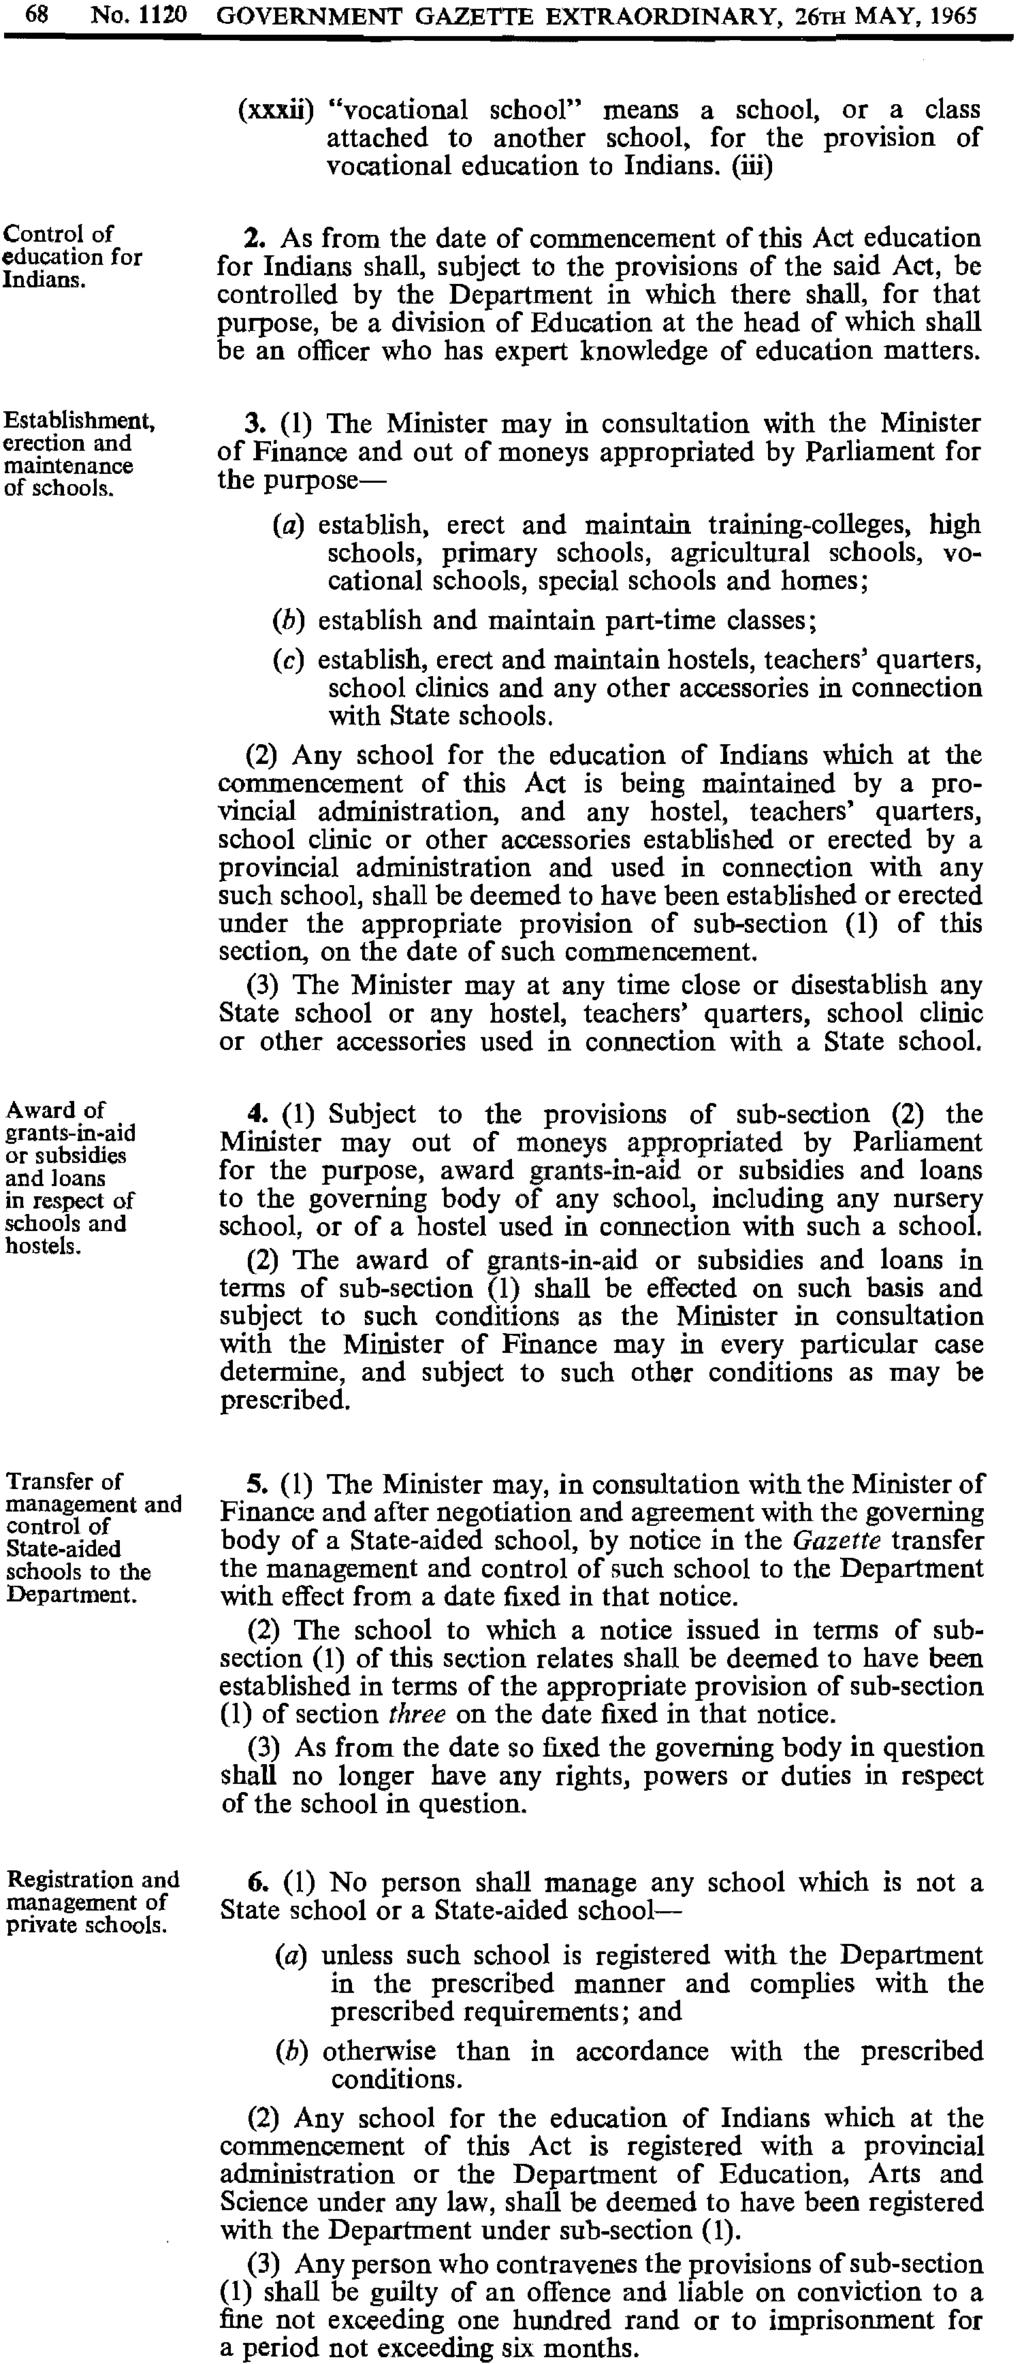 68 No.H2O GOVERNMENT GAZETTE EXTRAORDINARY, 26TH MAY, 1965 (xxxii) "vocational school" means a school, or a class attached to another school, for the provision of vocational education to Indians.